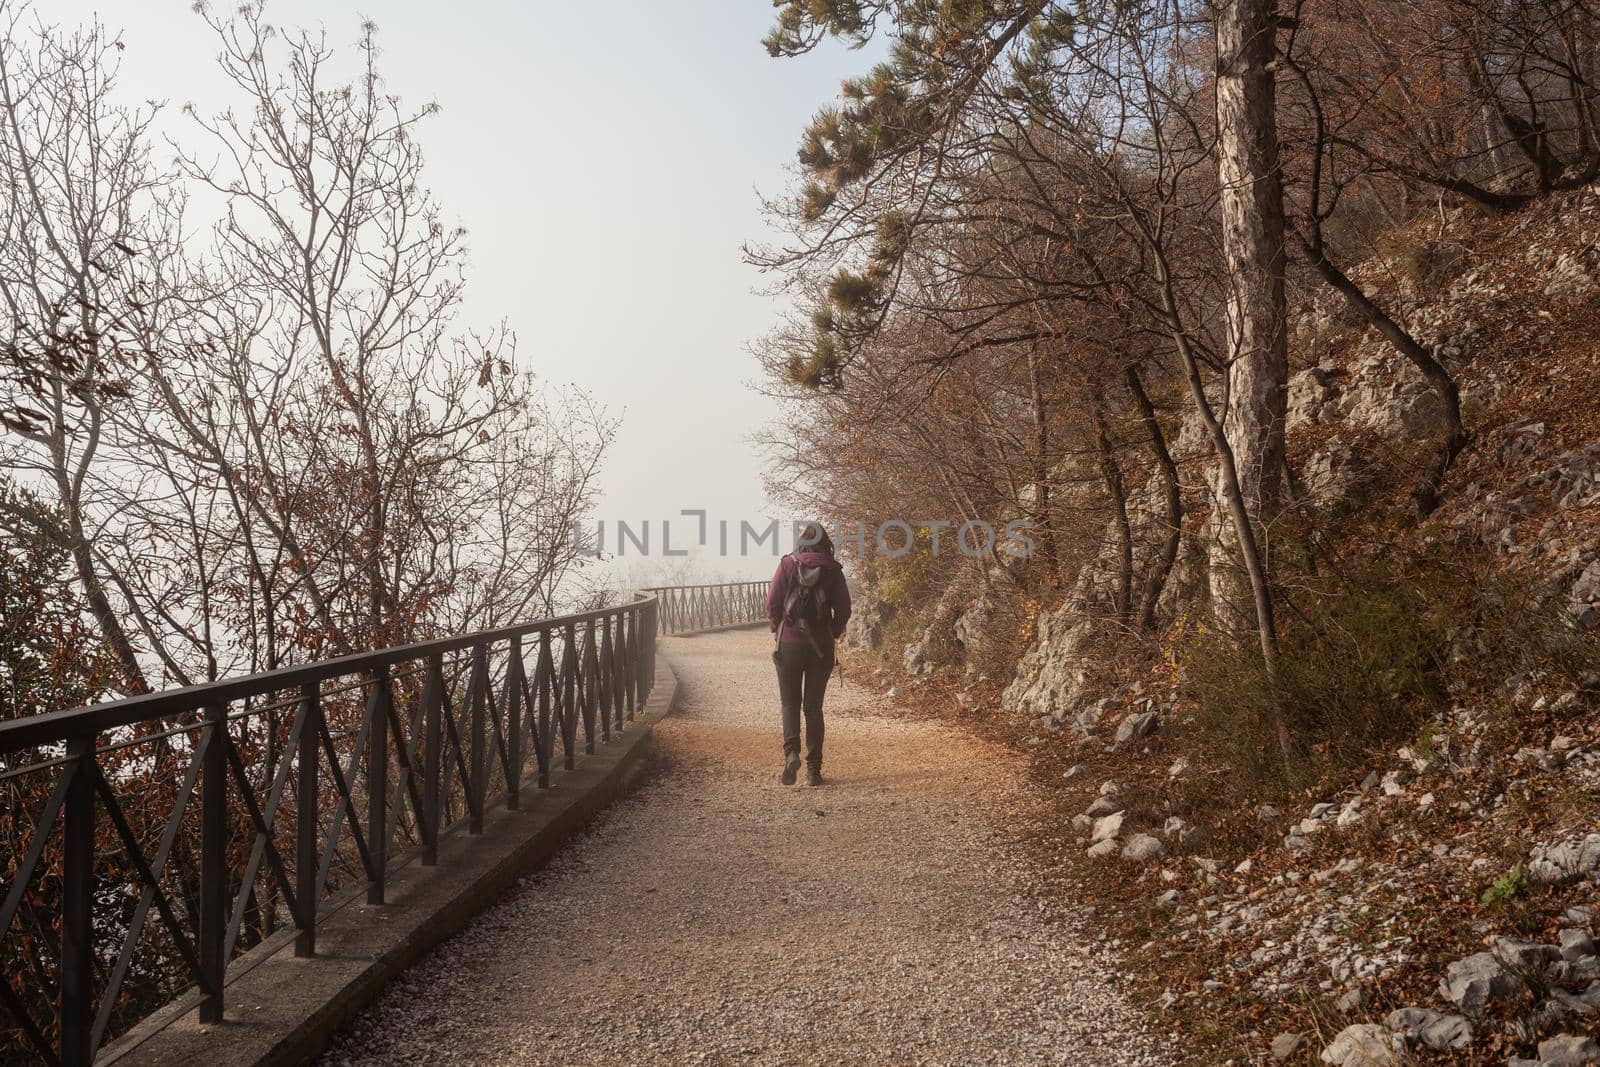 Back view of a Woman walking alone on rural misty path called Napoleonica, Trieste